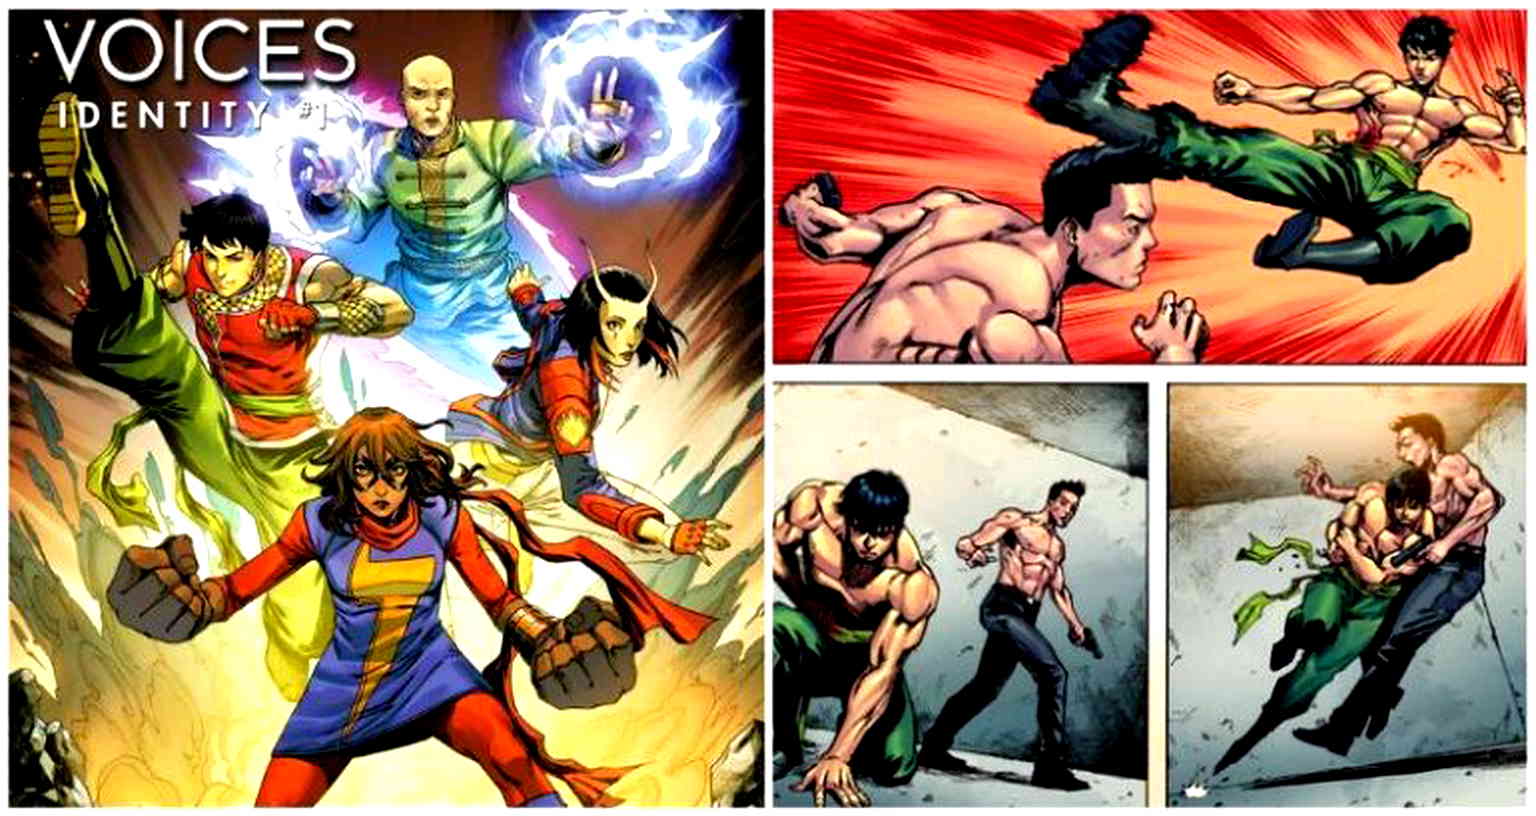 Marvel celebrates AAPI Heritage Month with anthology comic featuring Asian and AAPI talent